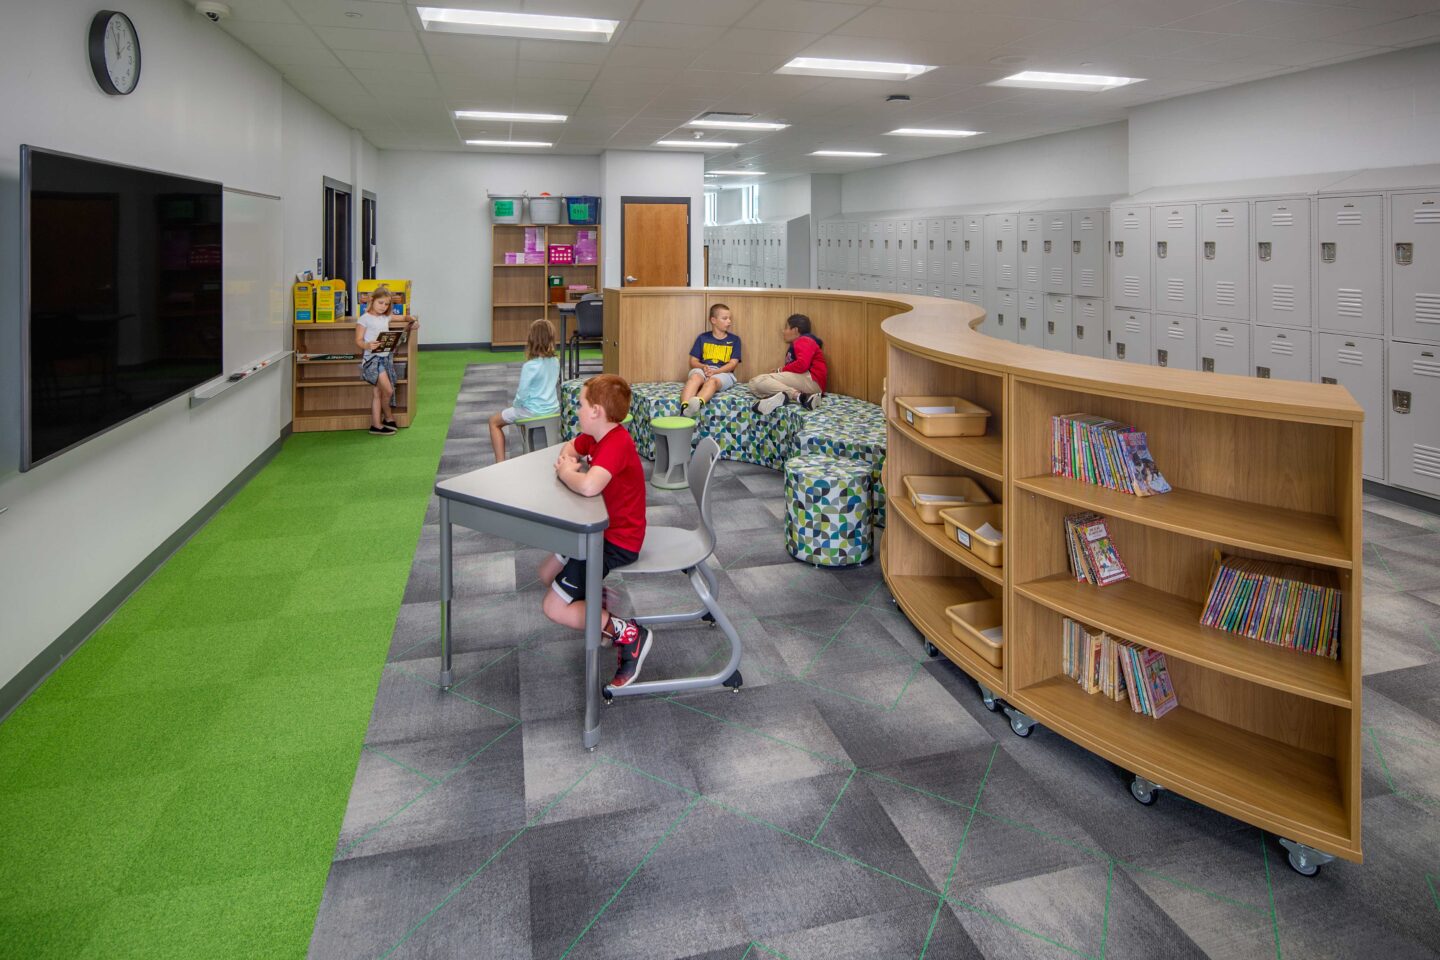 Low, curving shelves and flexible furniture add collaboration spaces off of hallways at Highland View Elementary in Greendale